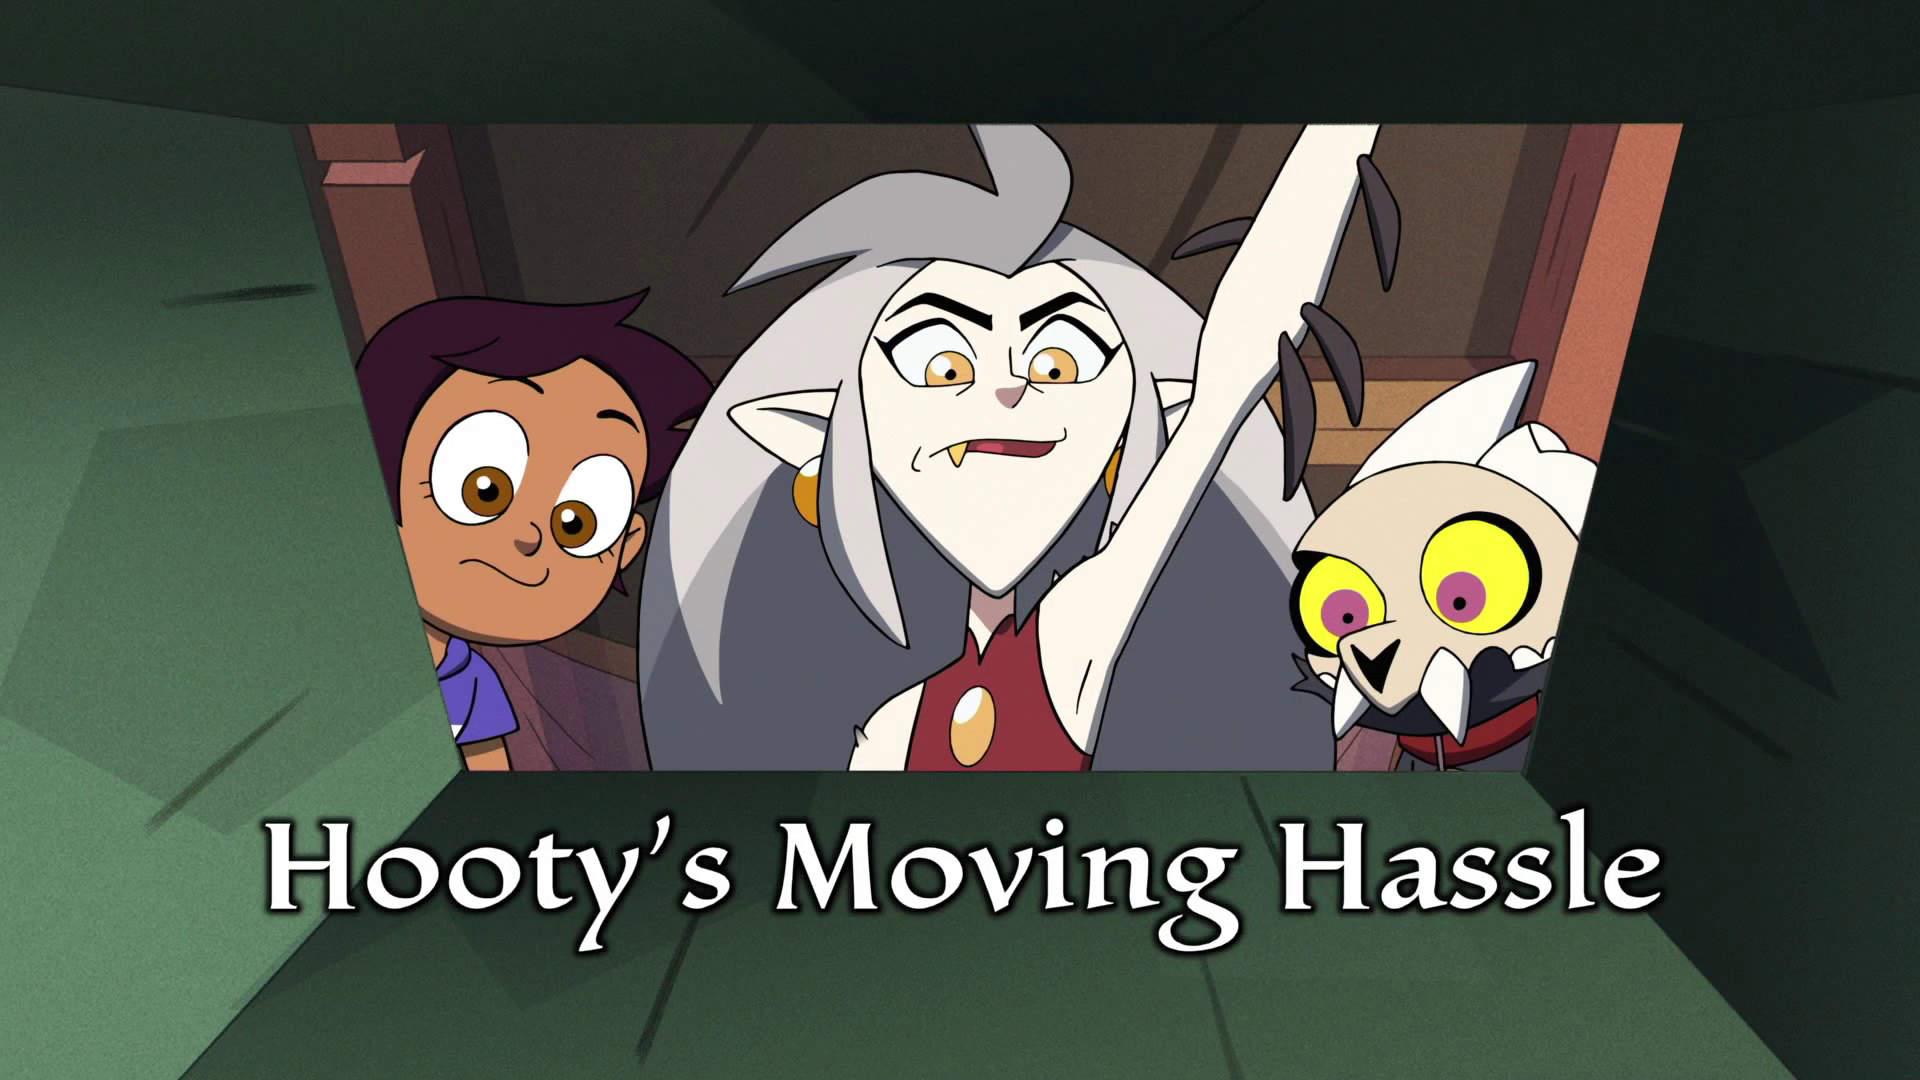 Eda once said: (What're some of eda's best quotes) : r/TheOwlHouse